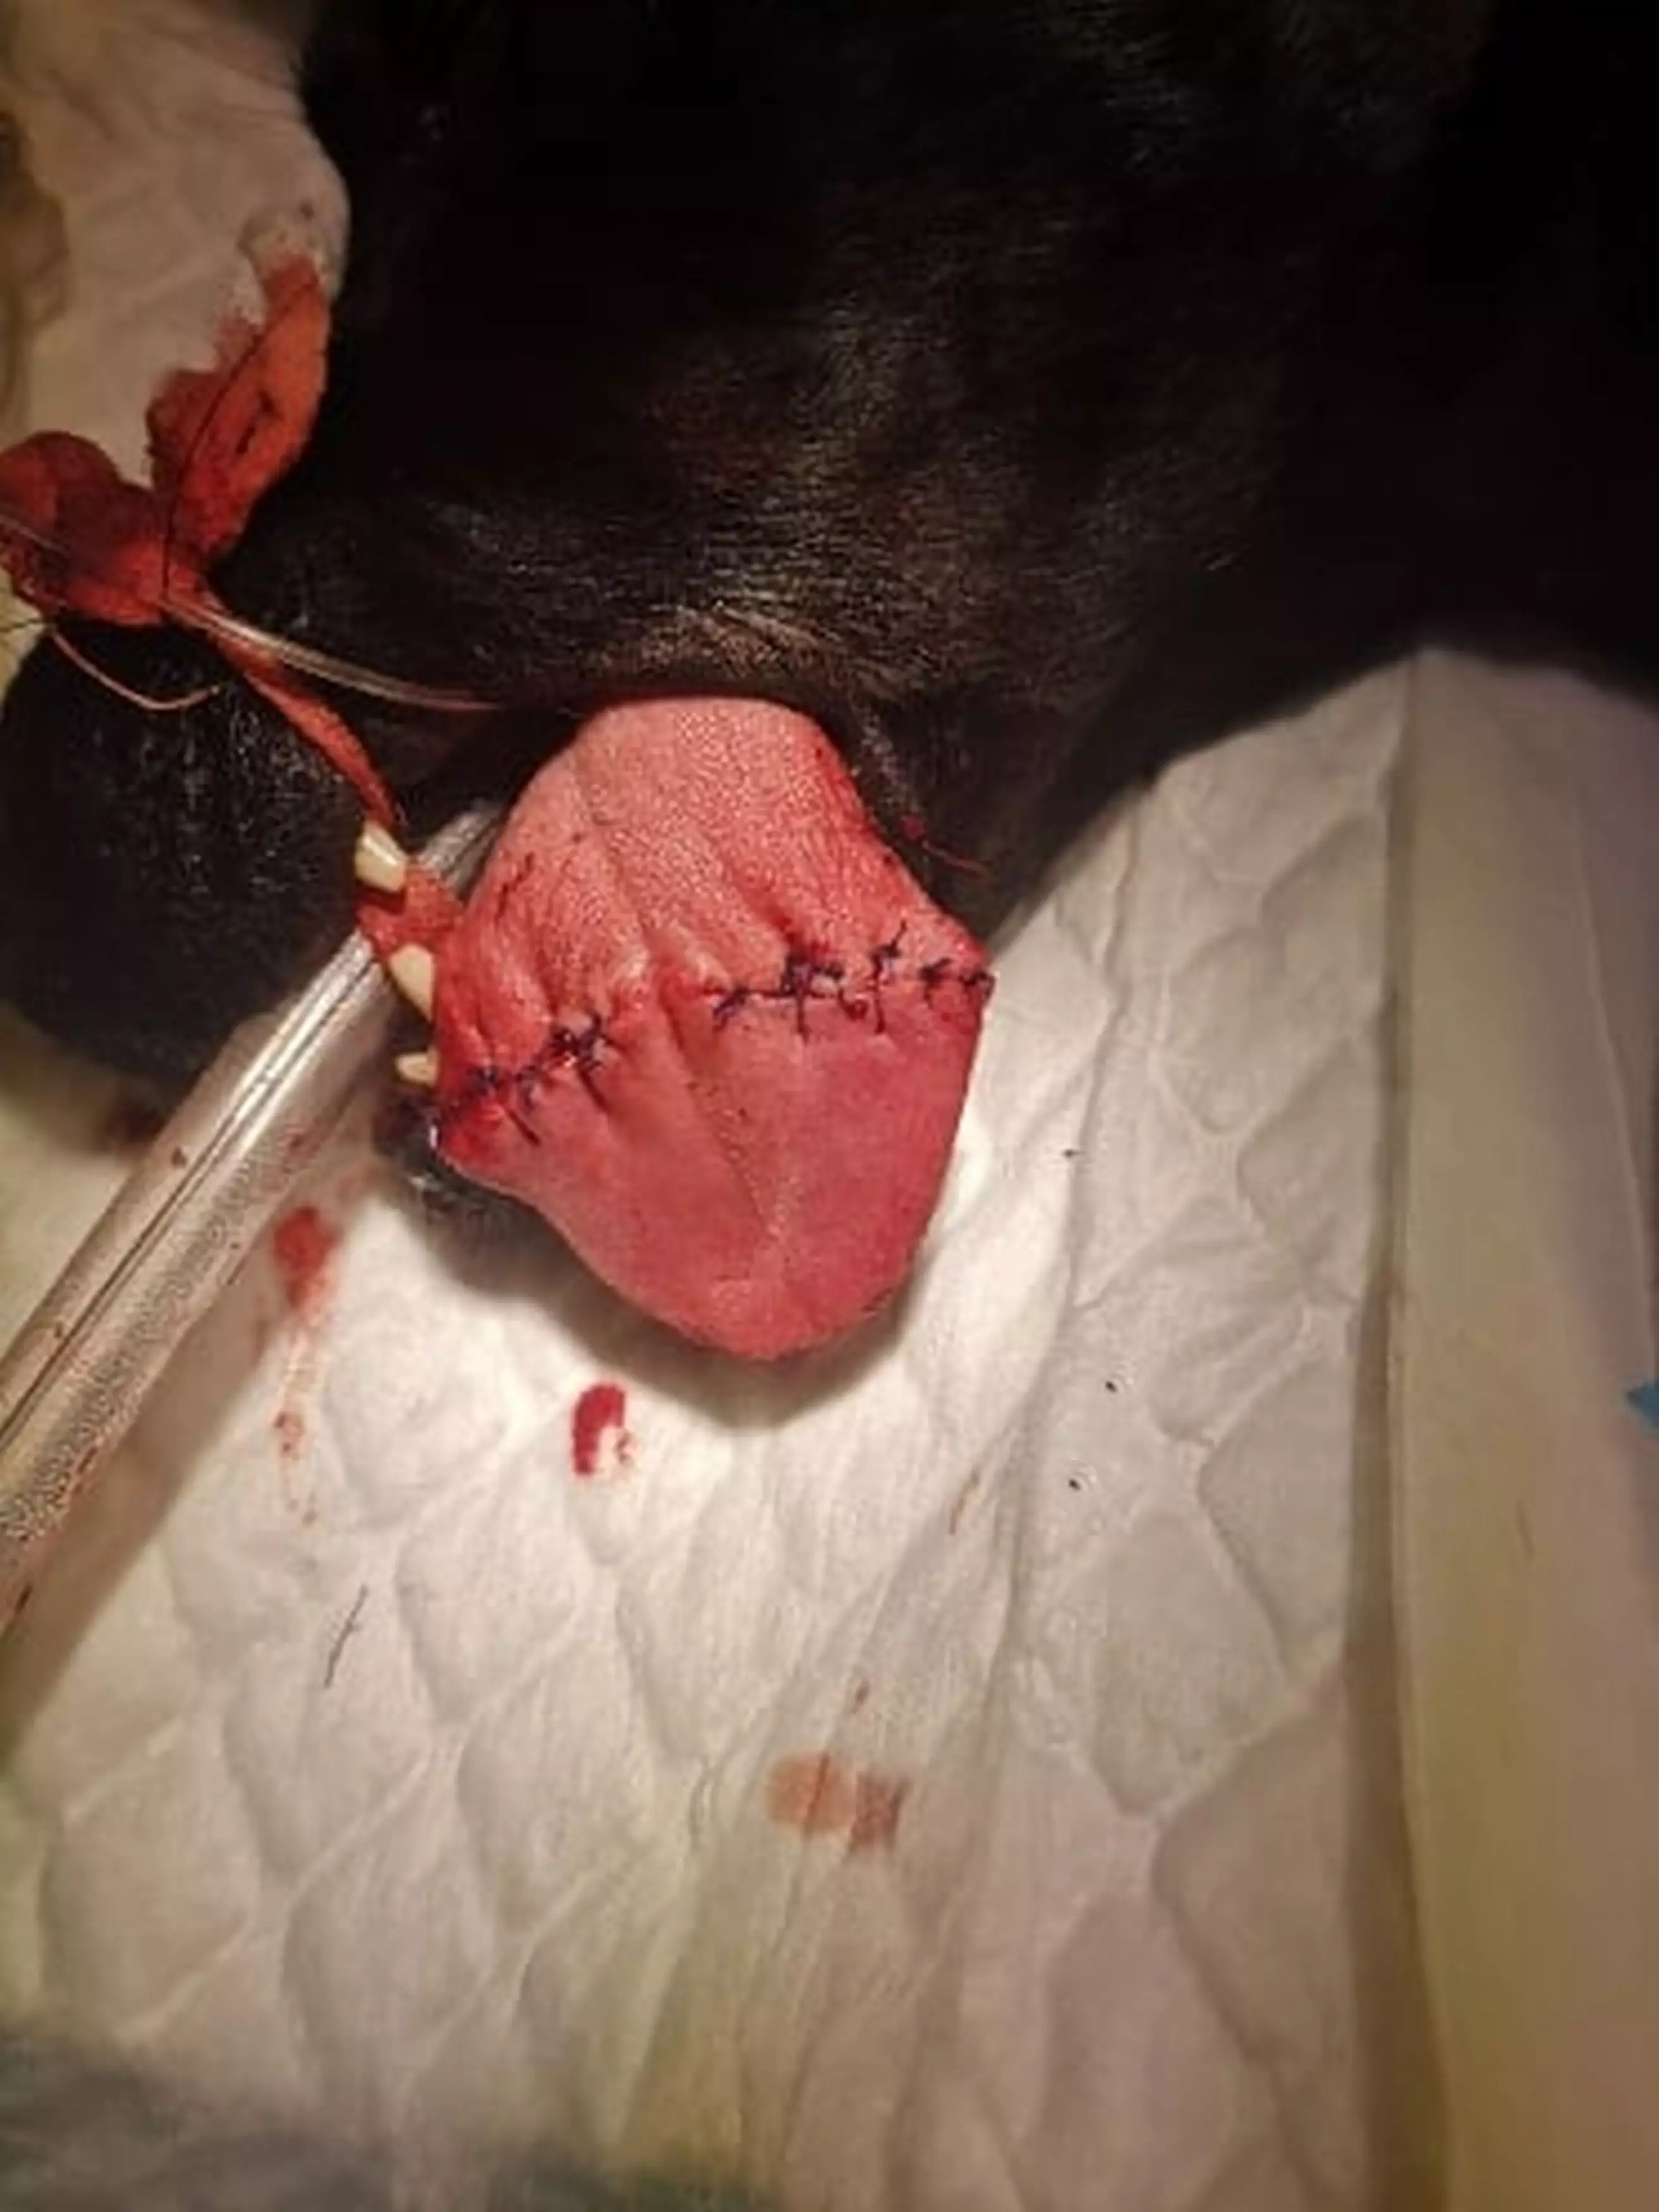 Poppy's tongue has now been stitched back together.